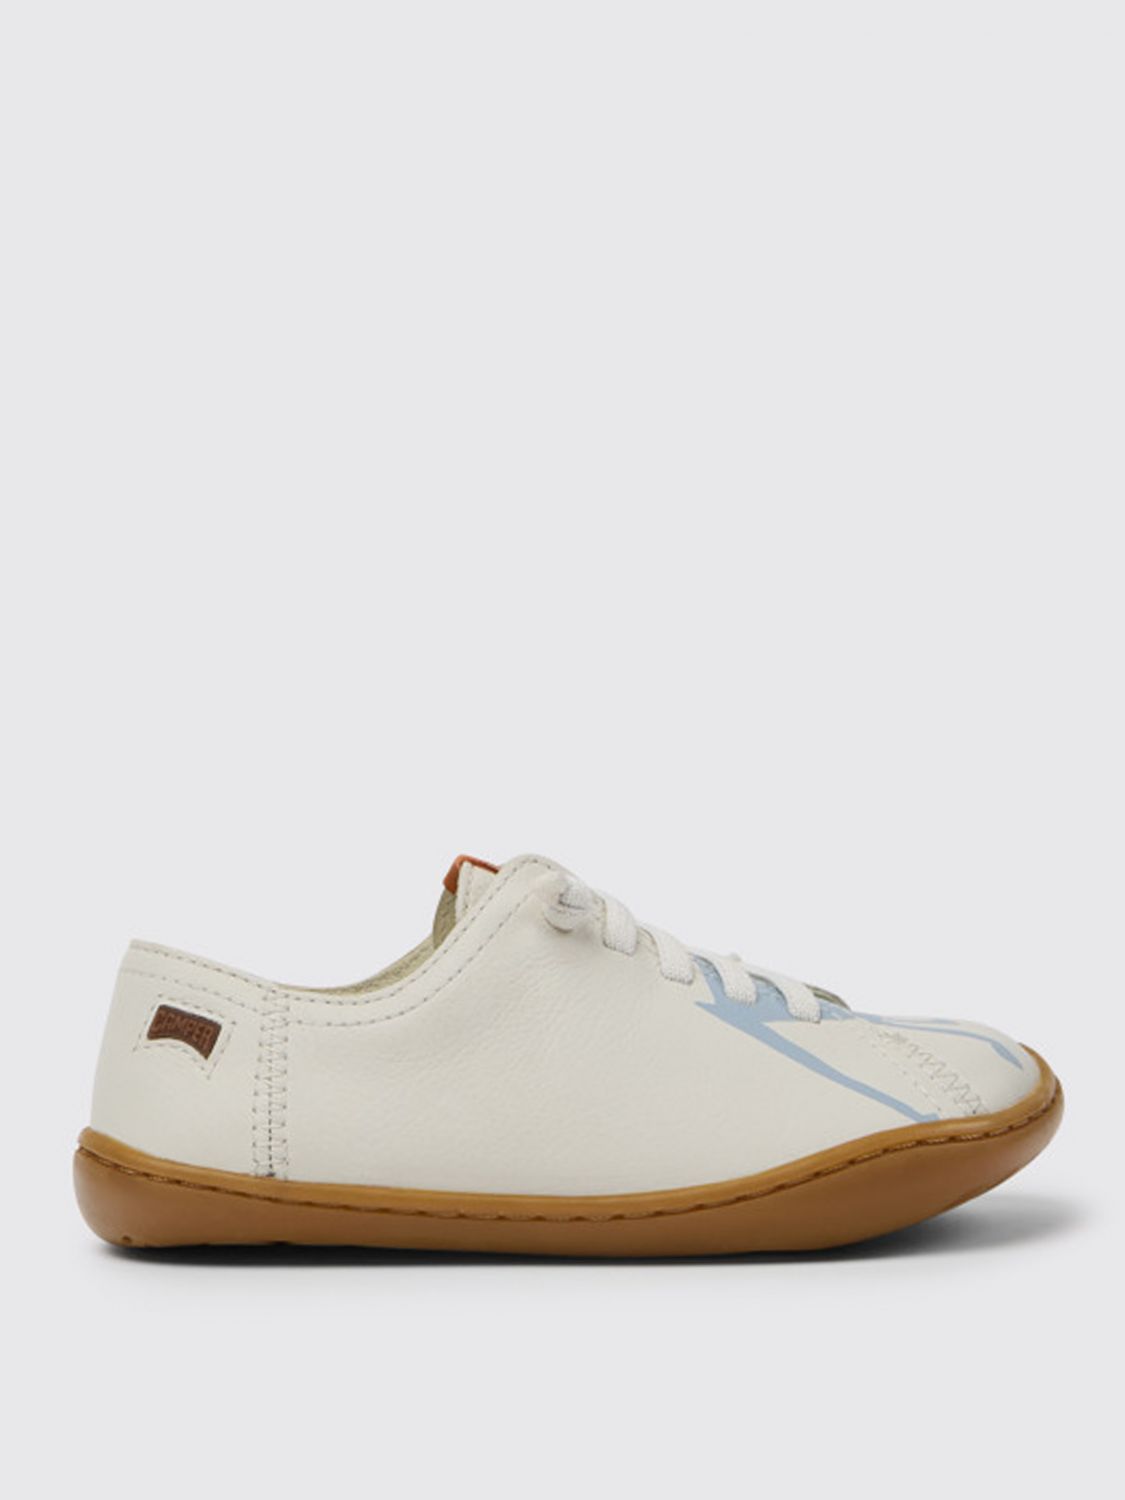 Camper Outlet: Twins shoes in calfskin - White | Camper shoes 80003-128 TWINS online GIGLIO.COM